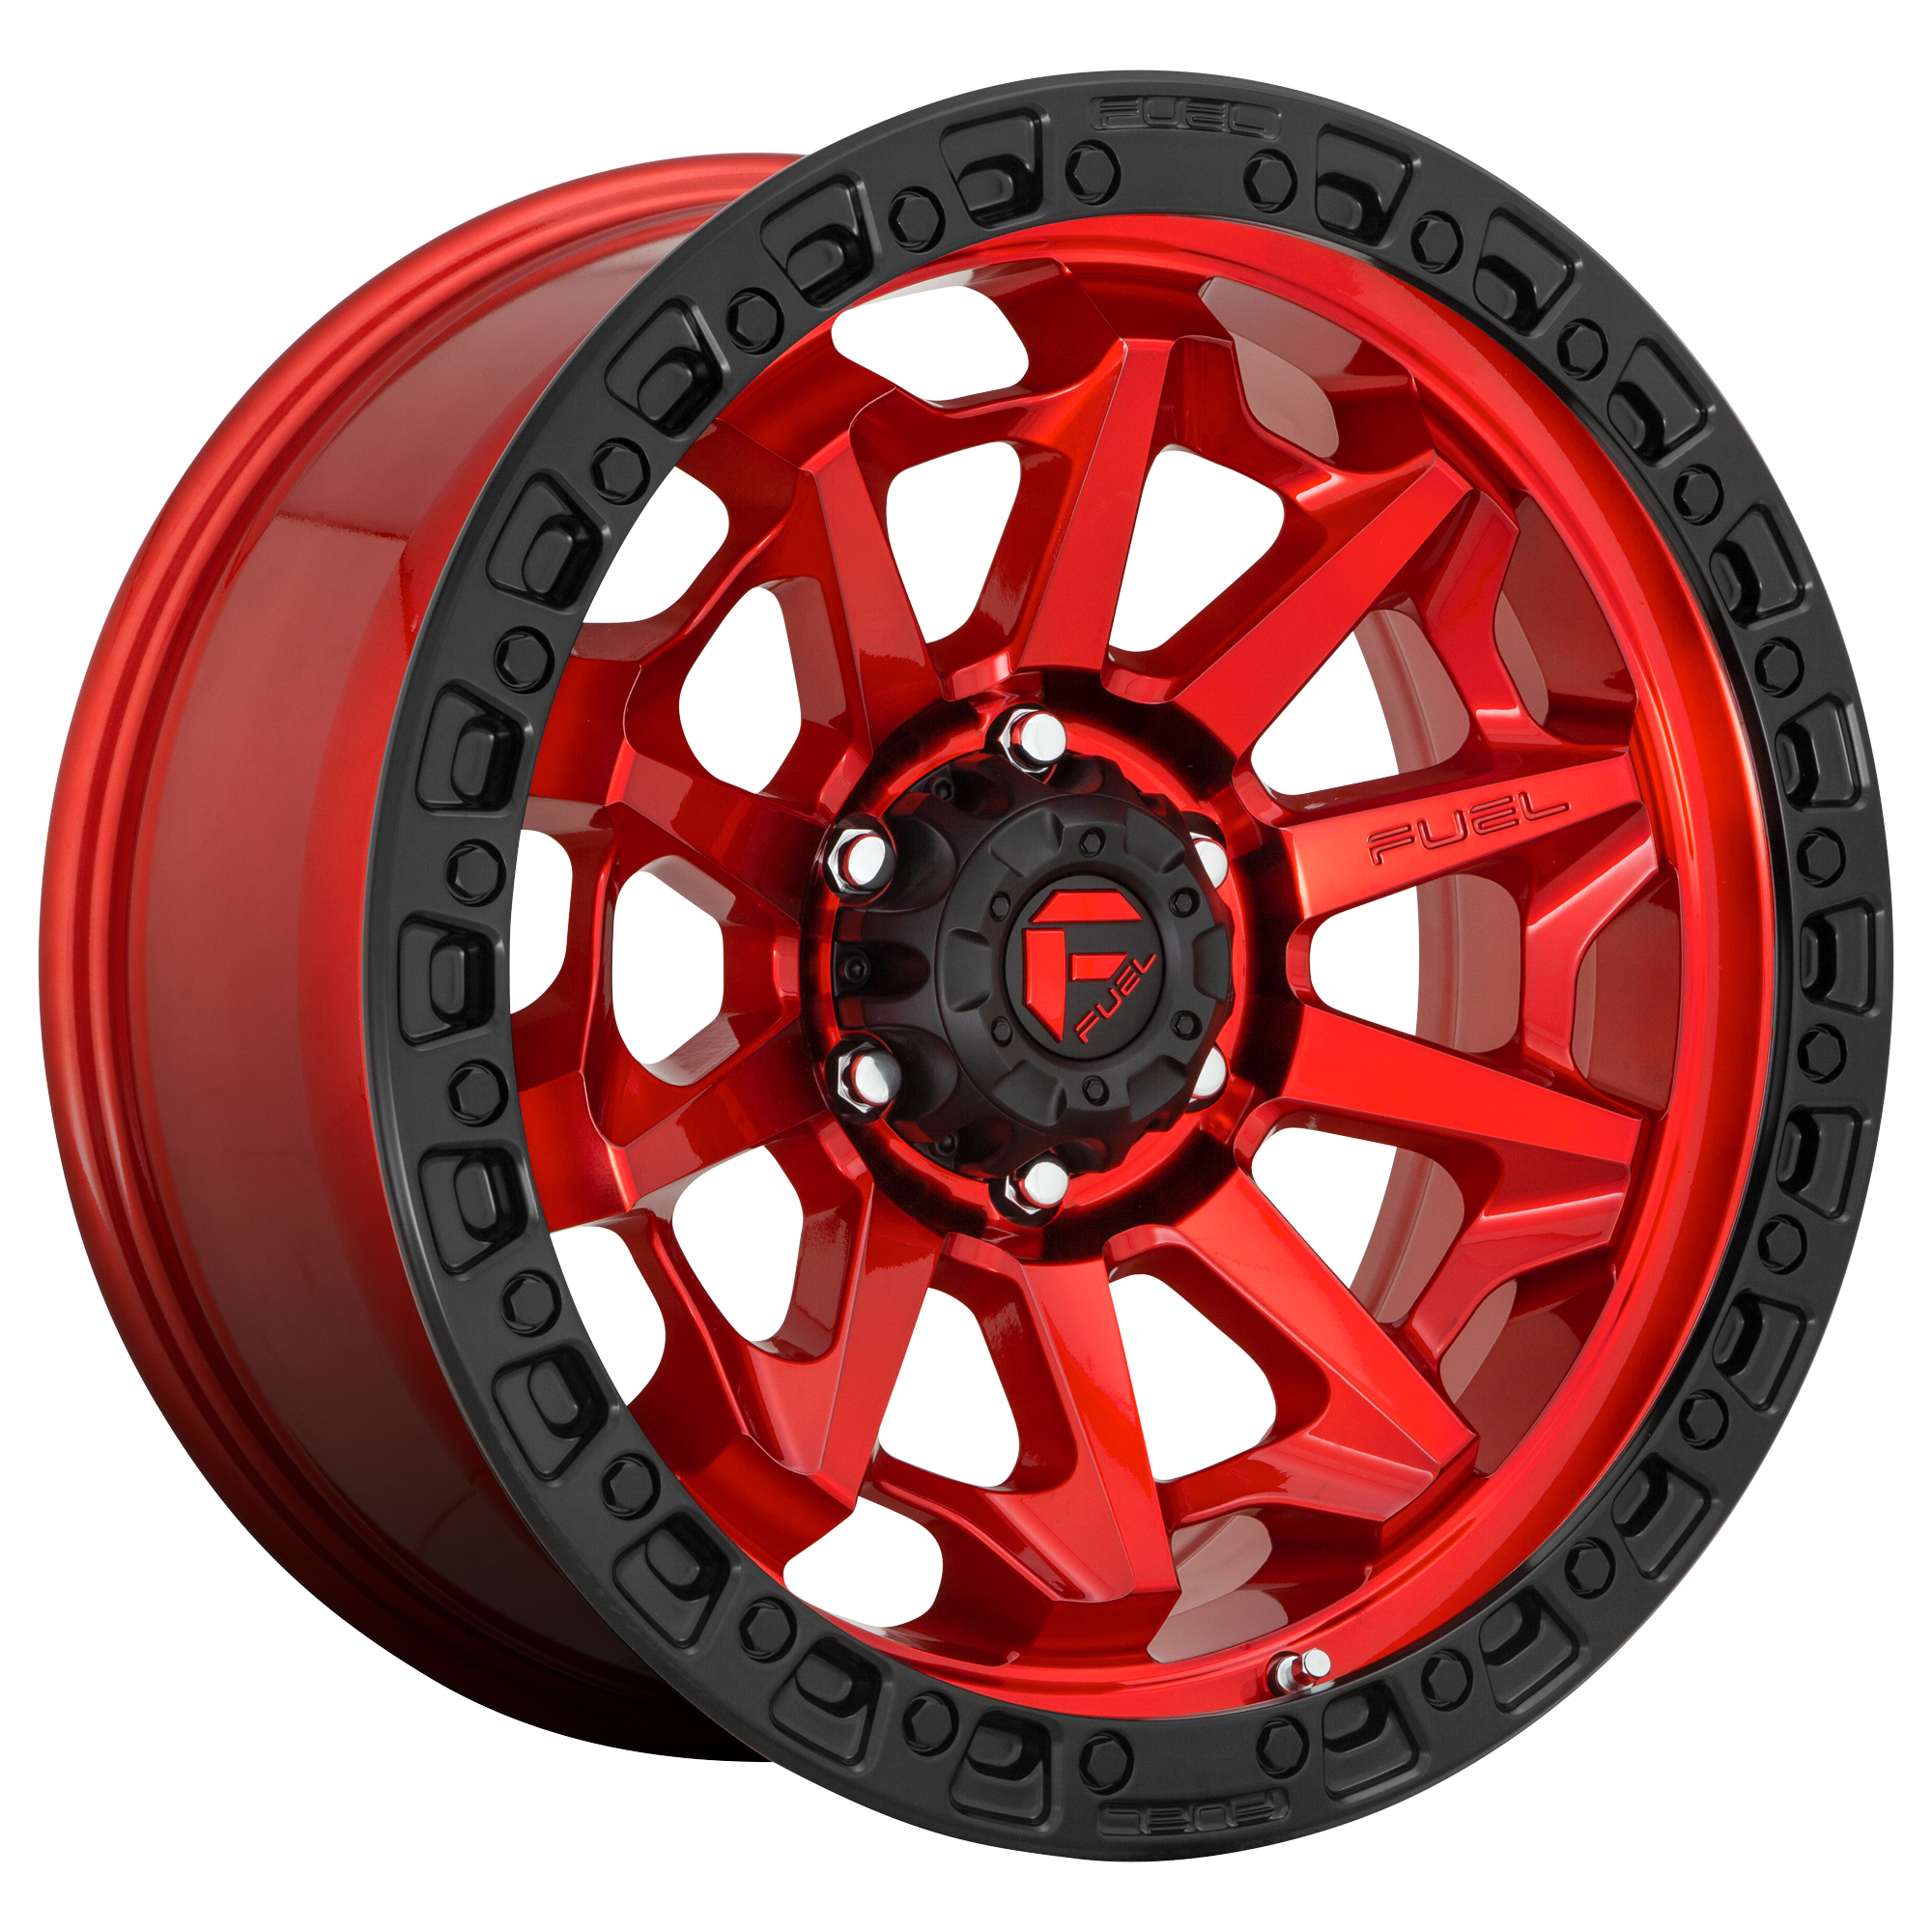 COVERT 18x9 5x139.70 CANDY RED BLACK BEAD RING (1 mm) - Tires and Engine Performance